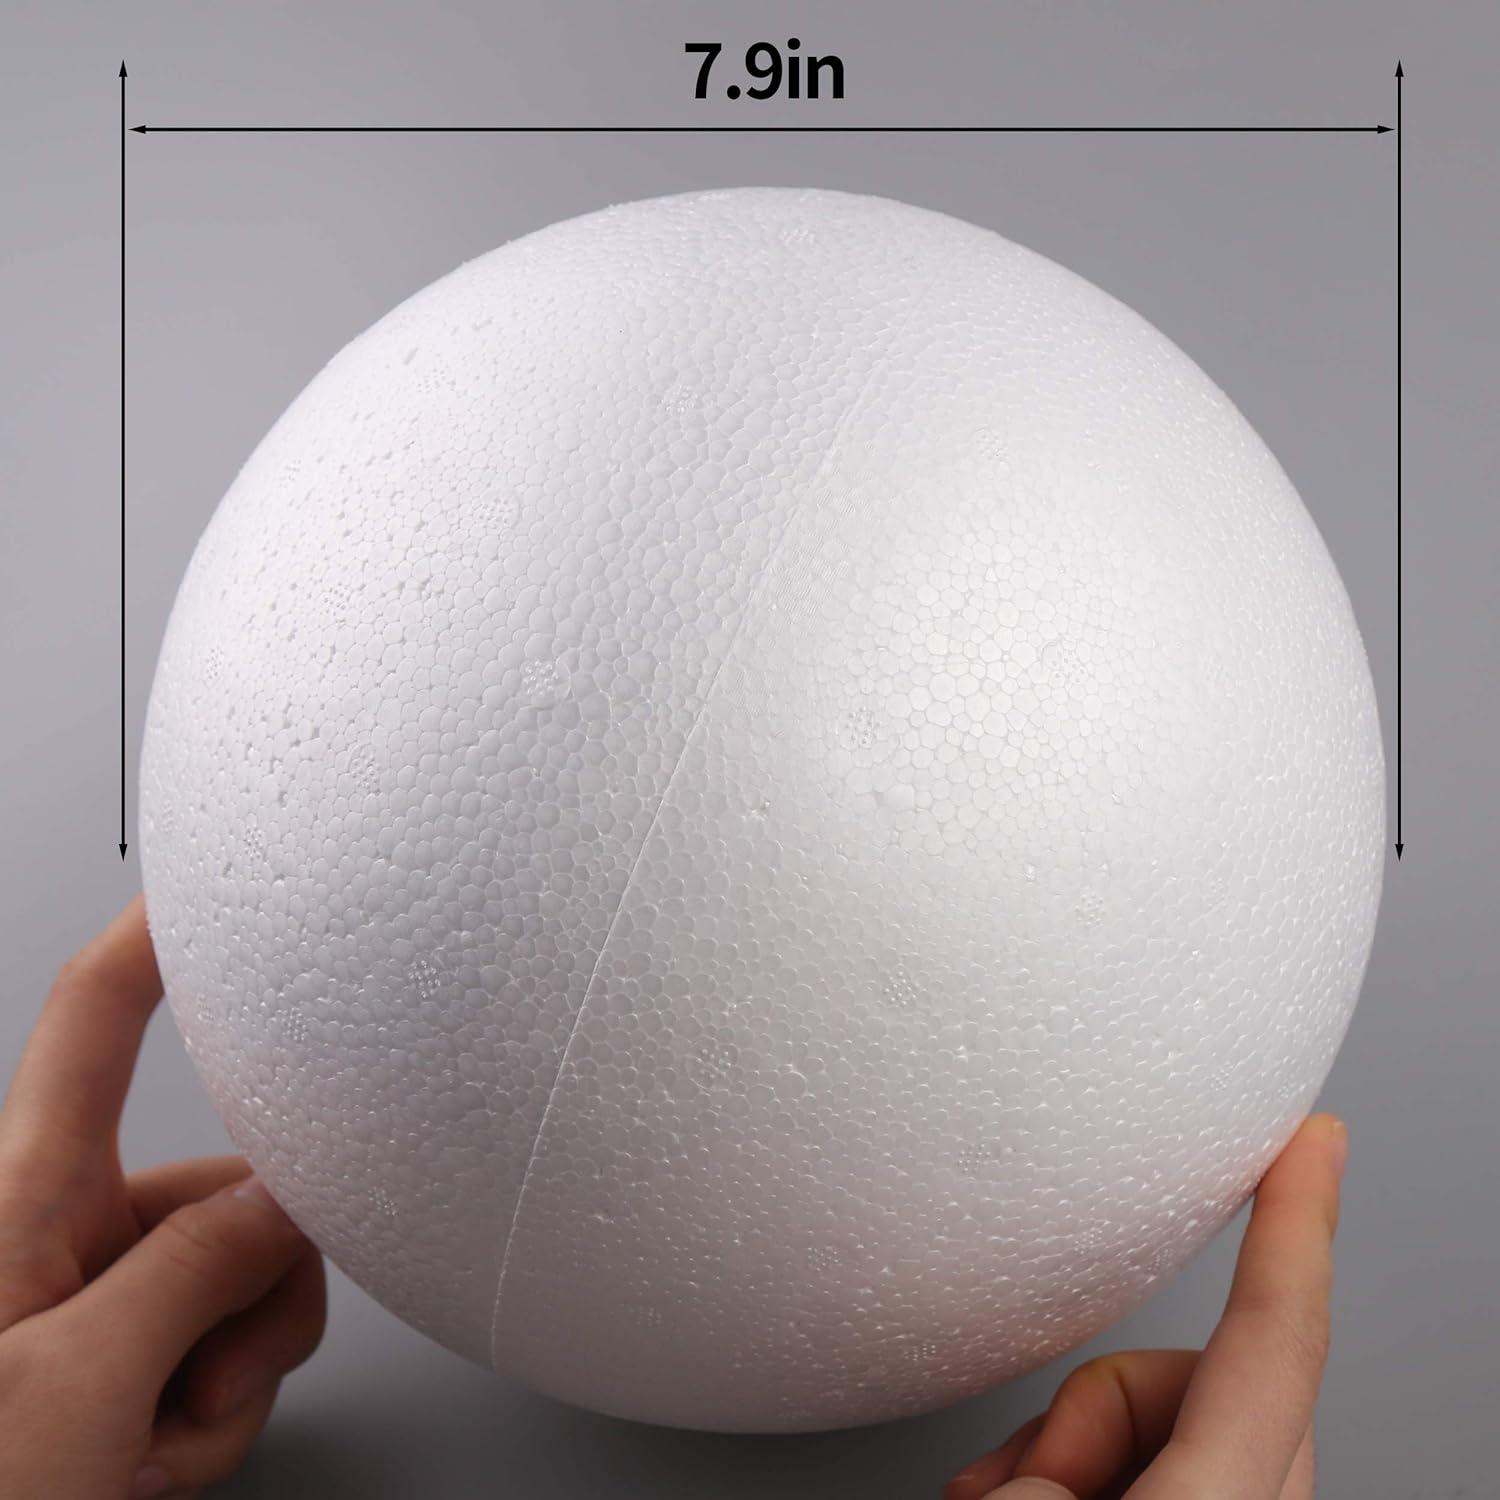 DIYASY 8 Large White Foam Balls 2 Pack Giant Foam Balls Smooth Solid Craft  Balls for Christmas DIY Ornaments. 8 Inch 2pcs